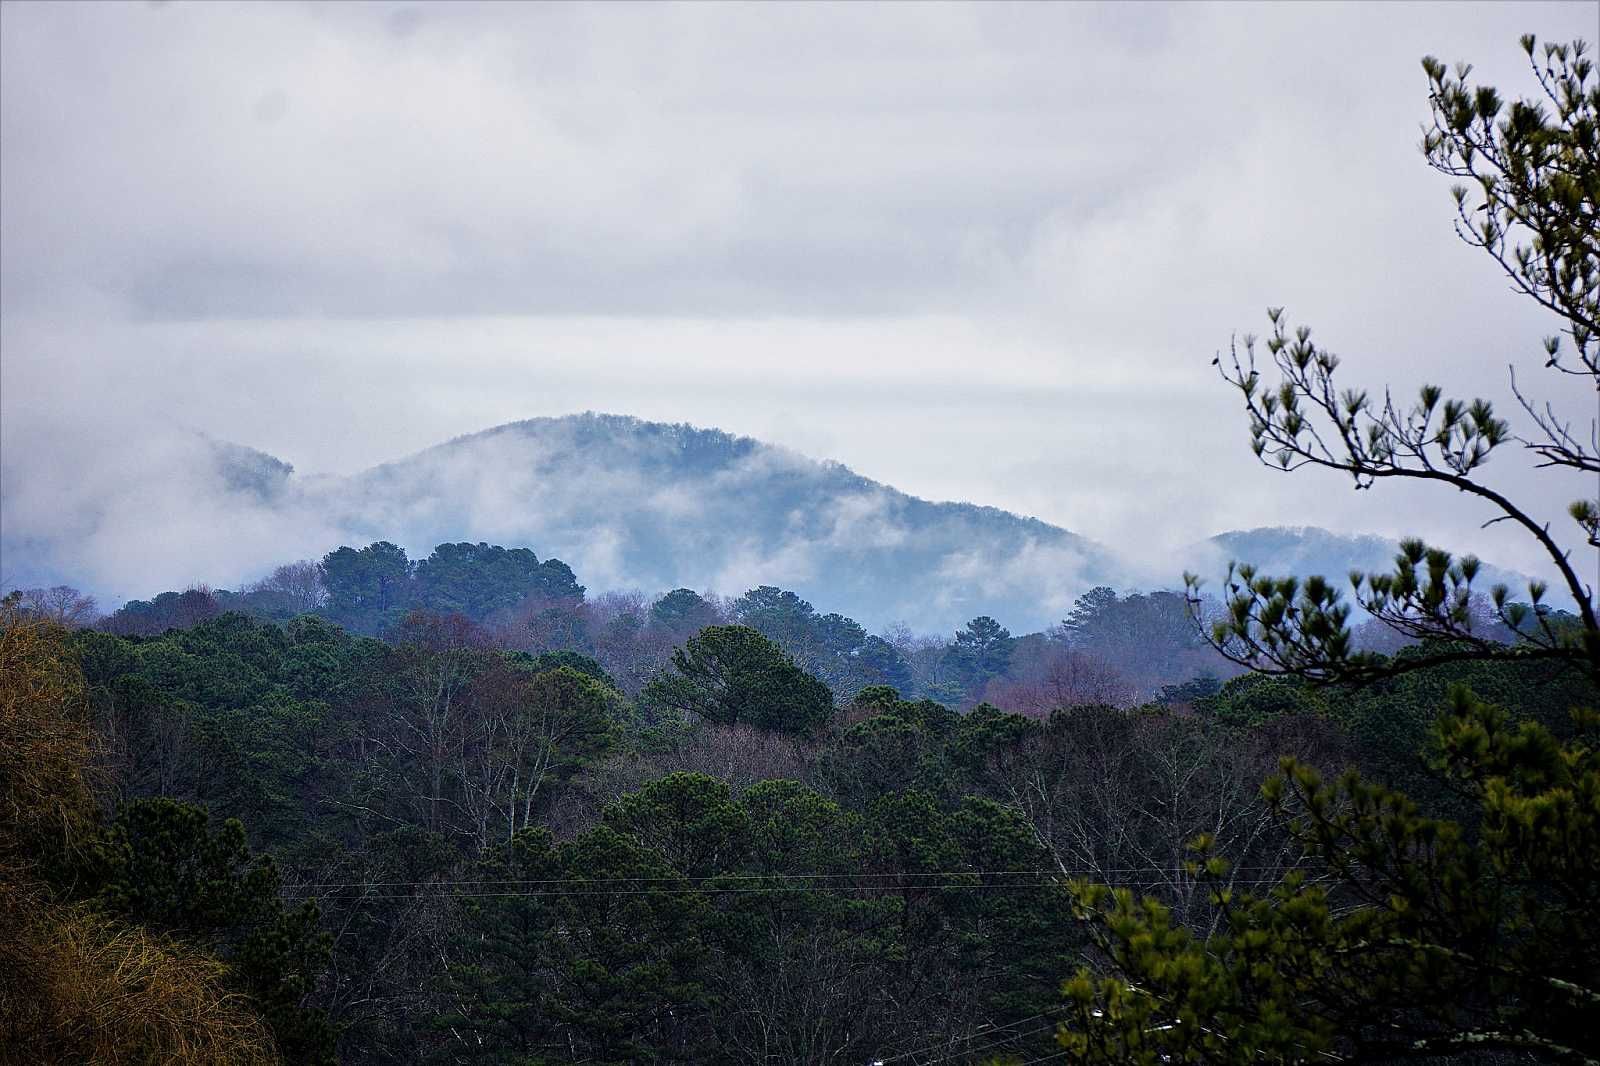 A mountain covered in fog with trees in the foreground